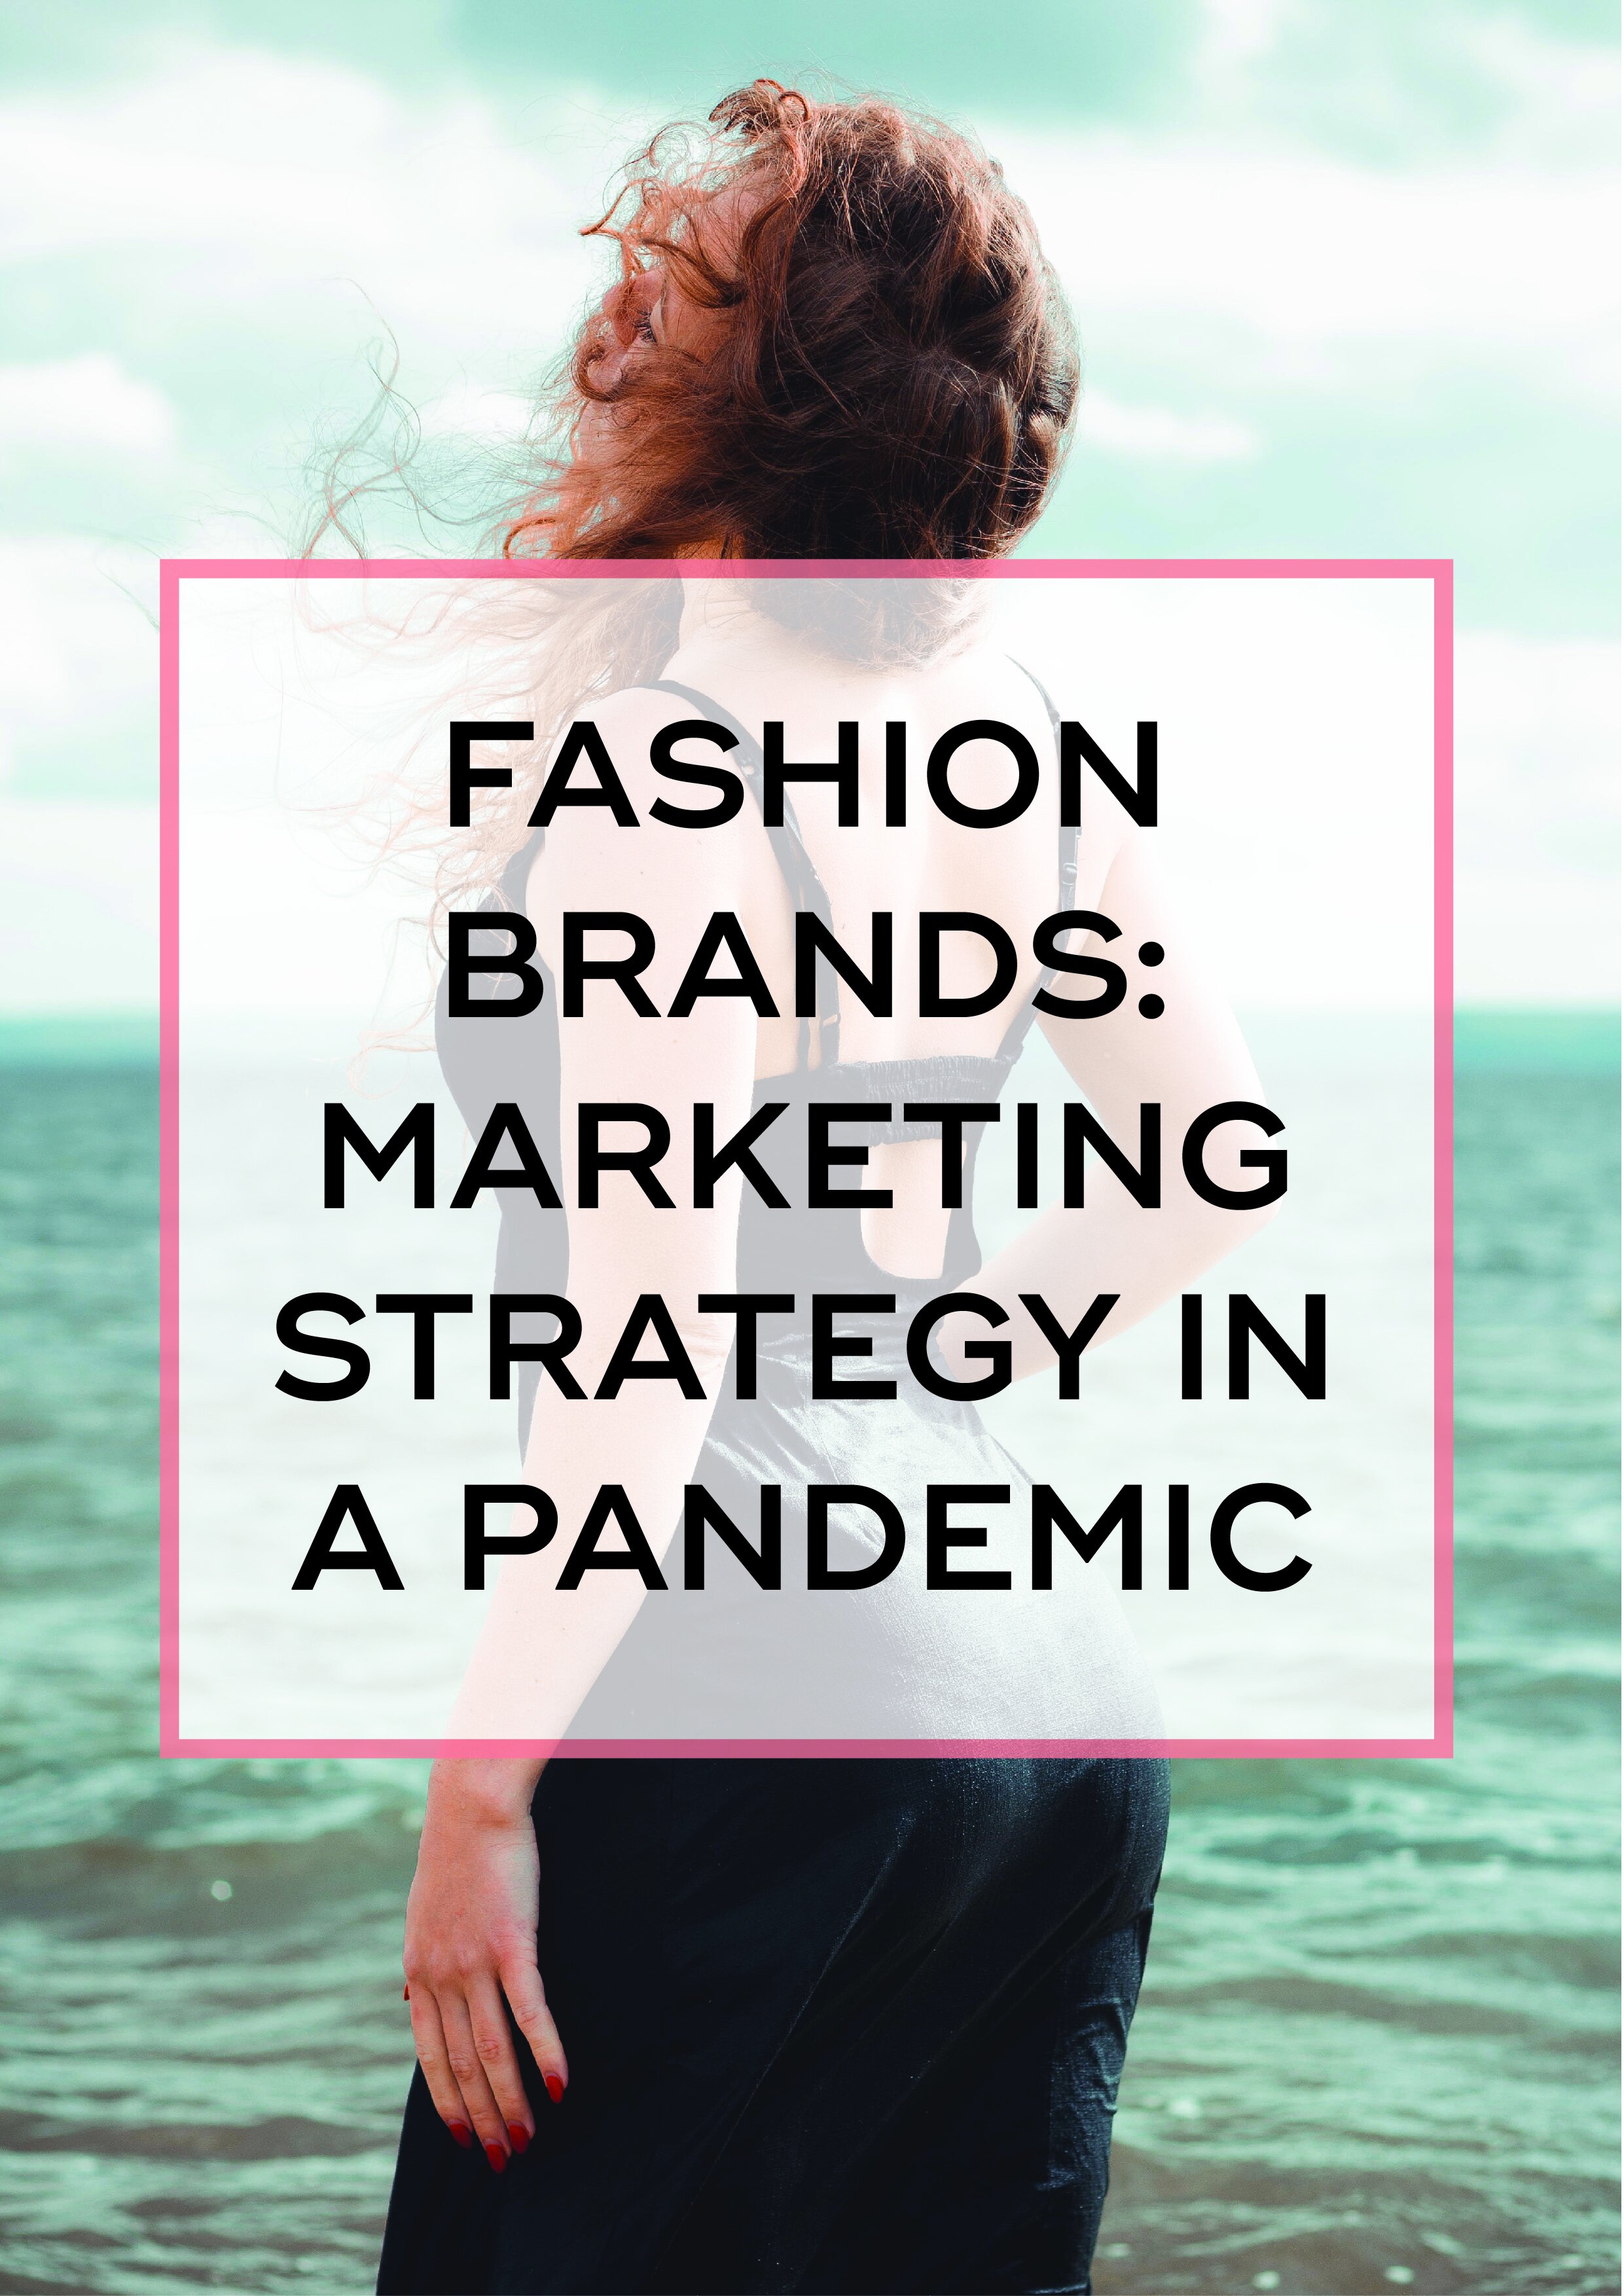 Fashion Brands Marketing Strategy in a Pandemic 2.jpg